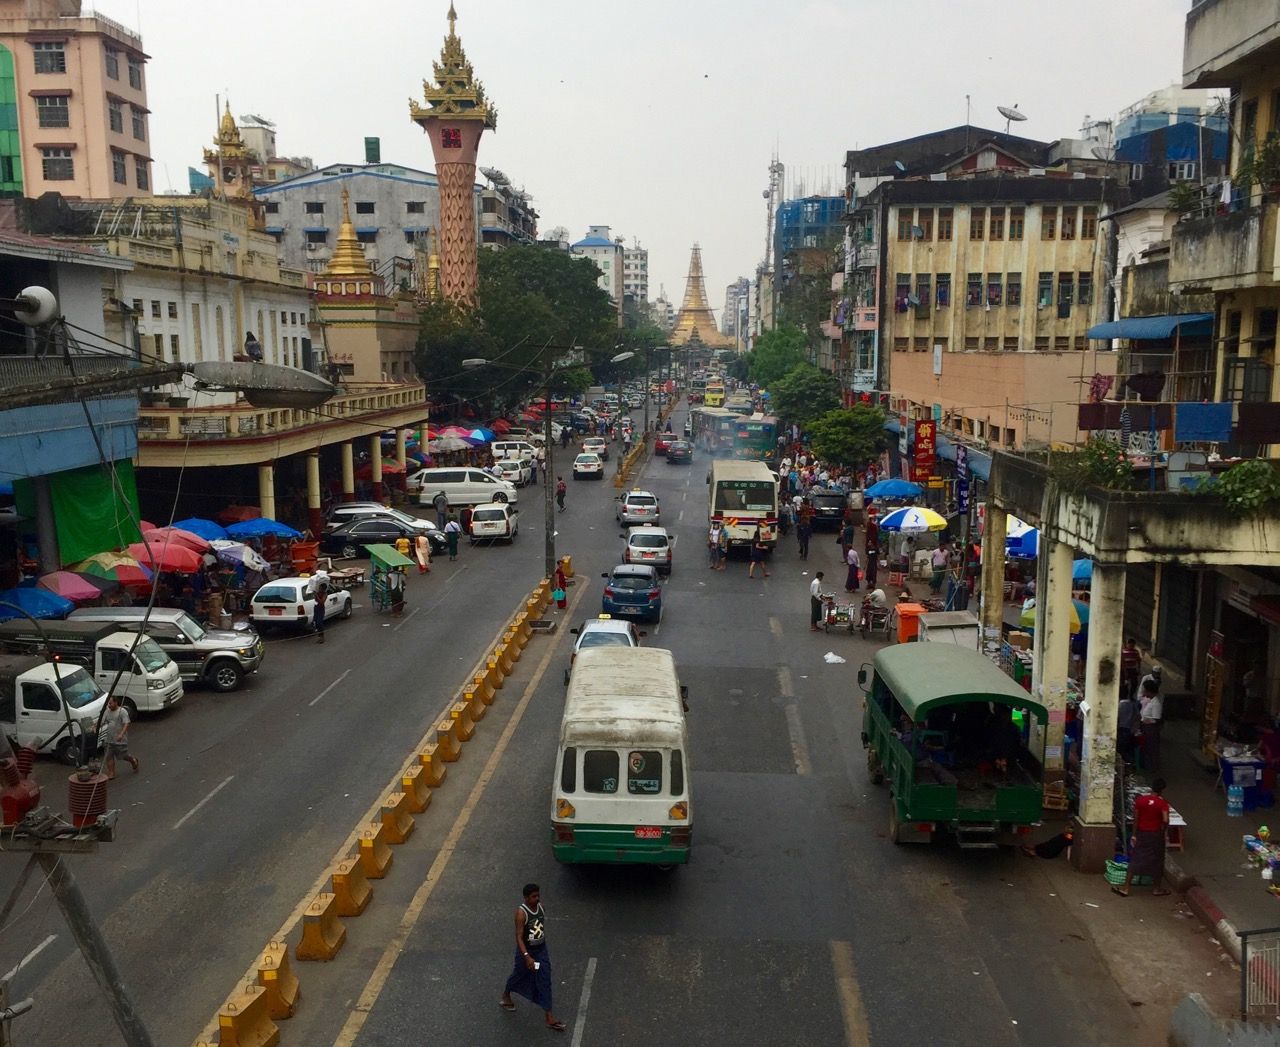 View from a raised pedestrian bridge with Sule Pagoda in the background.